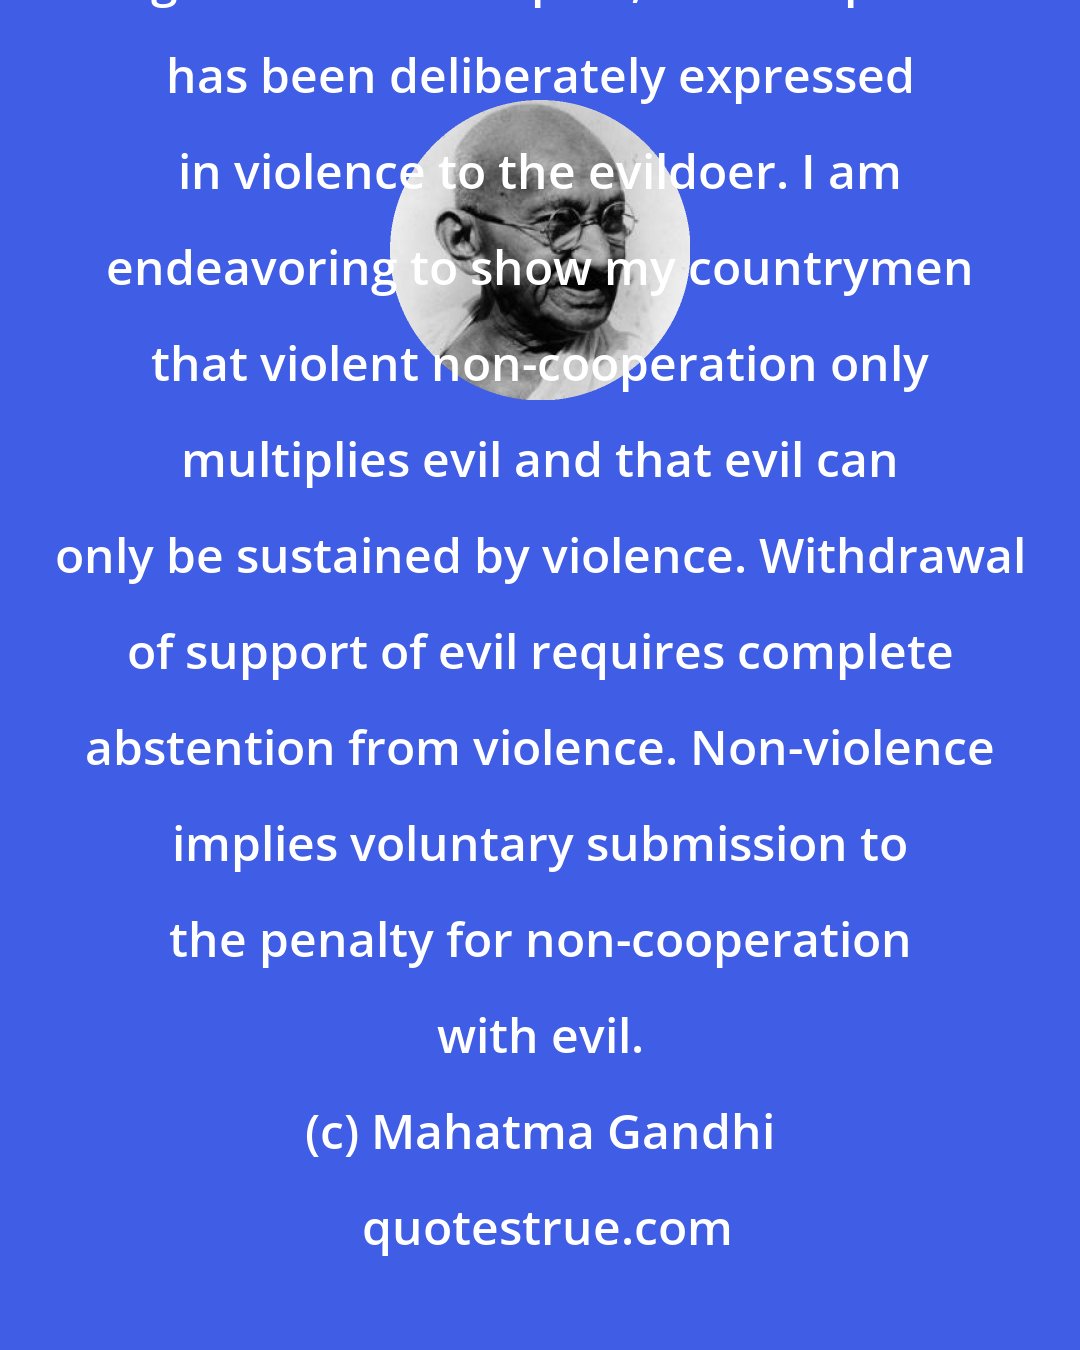 Mahatma Gandhi: In my humble opinion, non-cooperation with evil is as much a duty as is cooperation with good. But in the past, non-cooperation has been deliberately expressed in violence to the evildoer. I am endeavoring to show my countrymen that violent non-cooperation only multiplies evil and that evil can only be sustained by violence. Withdrawal of support of evil requires complete abstention from violence. Non-violence implies voluntary submission to the penalty for non-cooperation with evil.